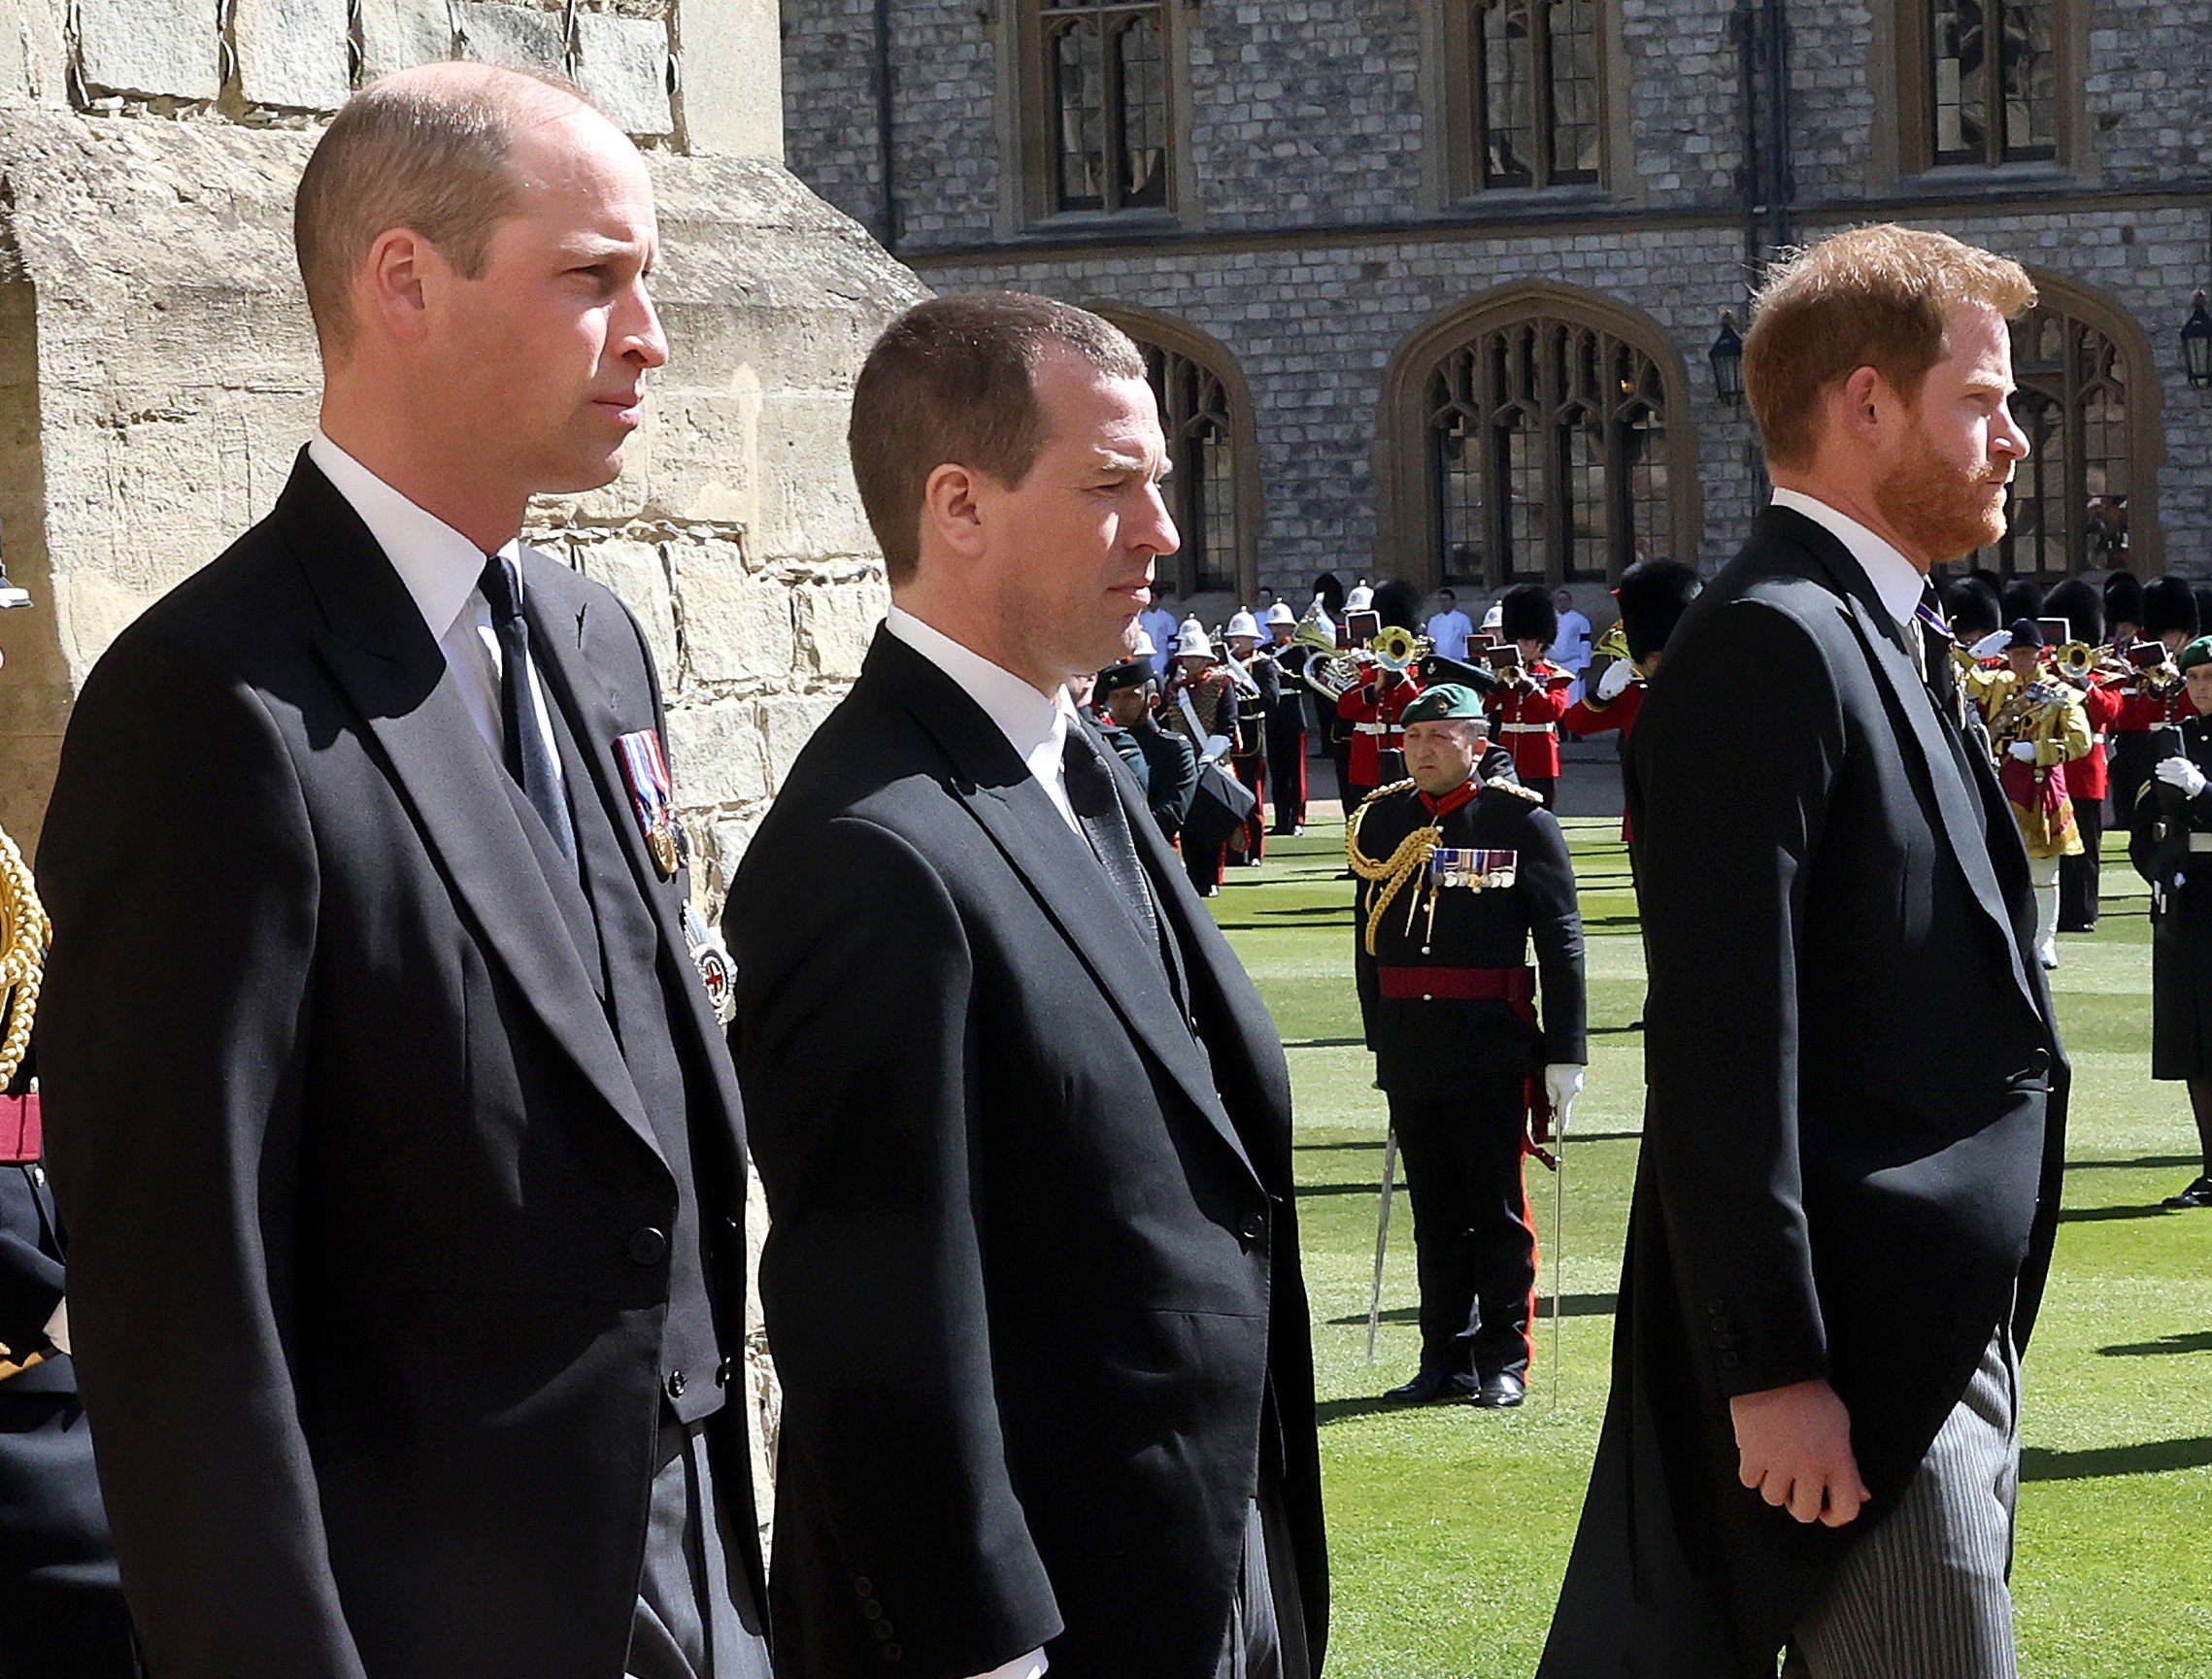 Prince William, Peter Phillips, Prince Harry follow Prince Philip's coffin during the ceremonial funeral procession